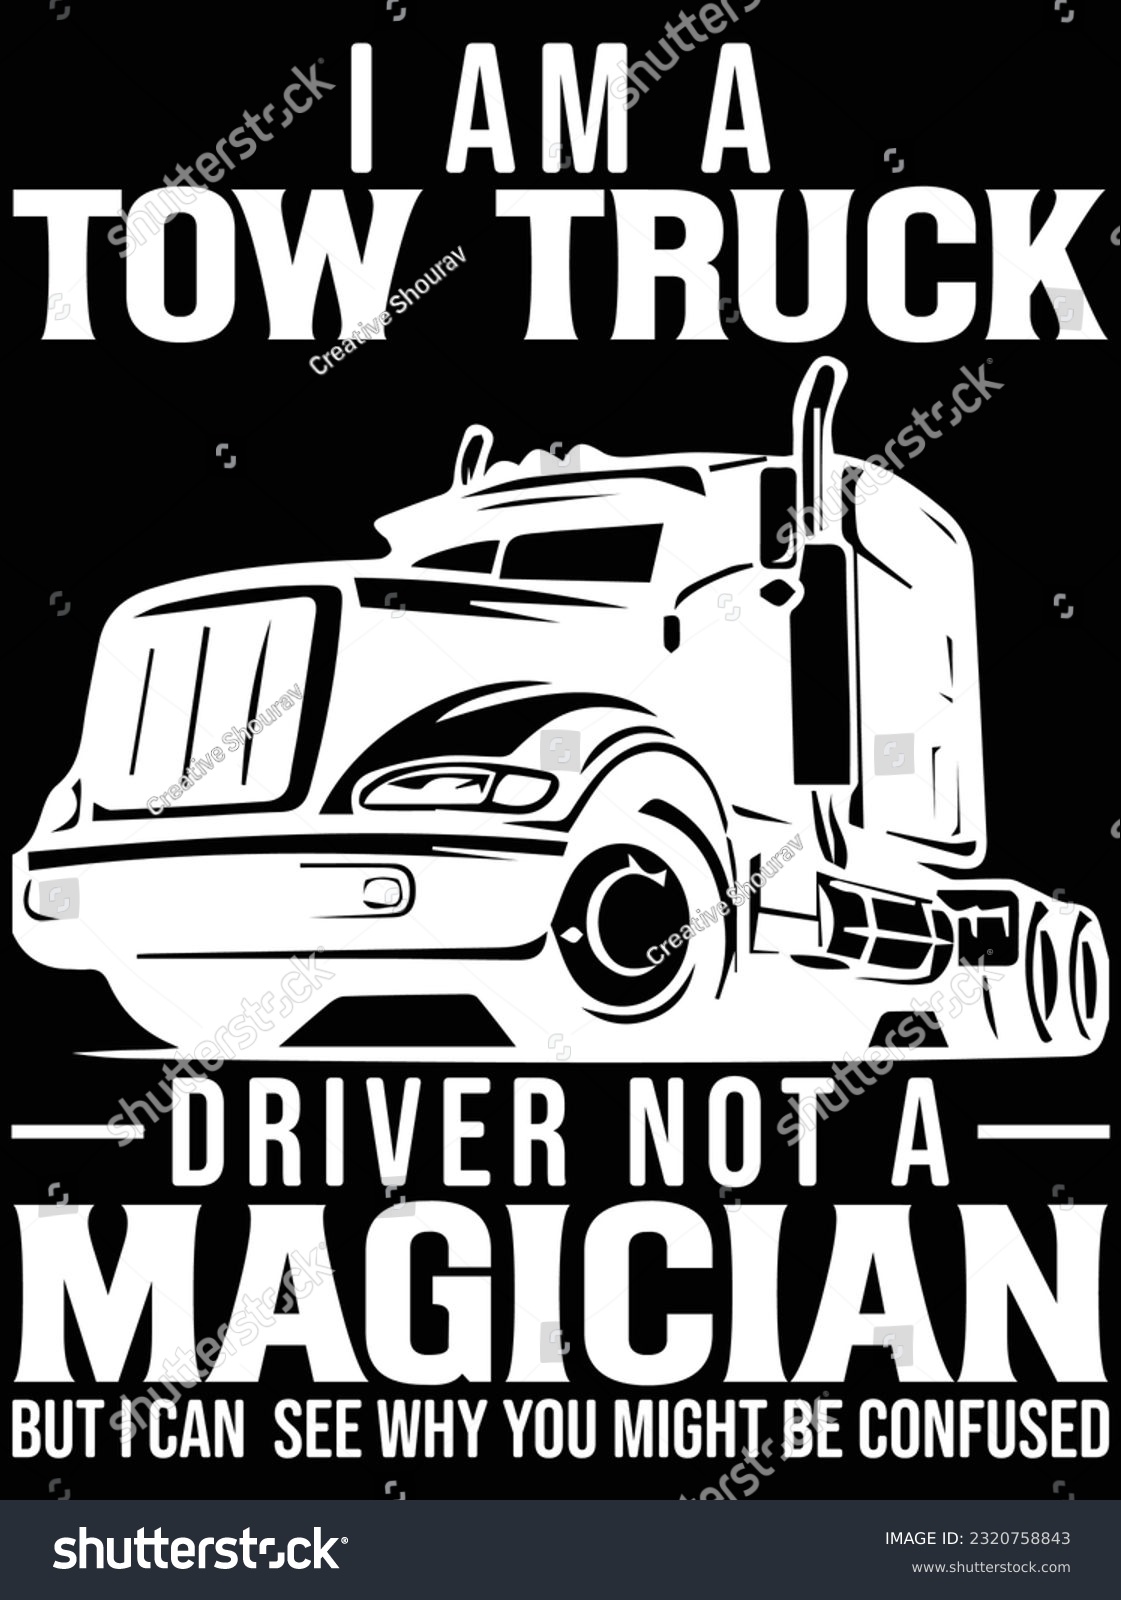 SVG of I am a tow truck driver not a magician vector art design, eps file. design file for t-shirt. SVG, EPS cuttable design file svg